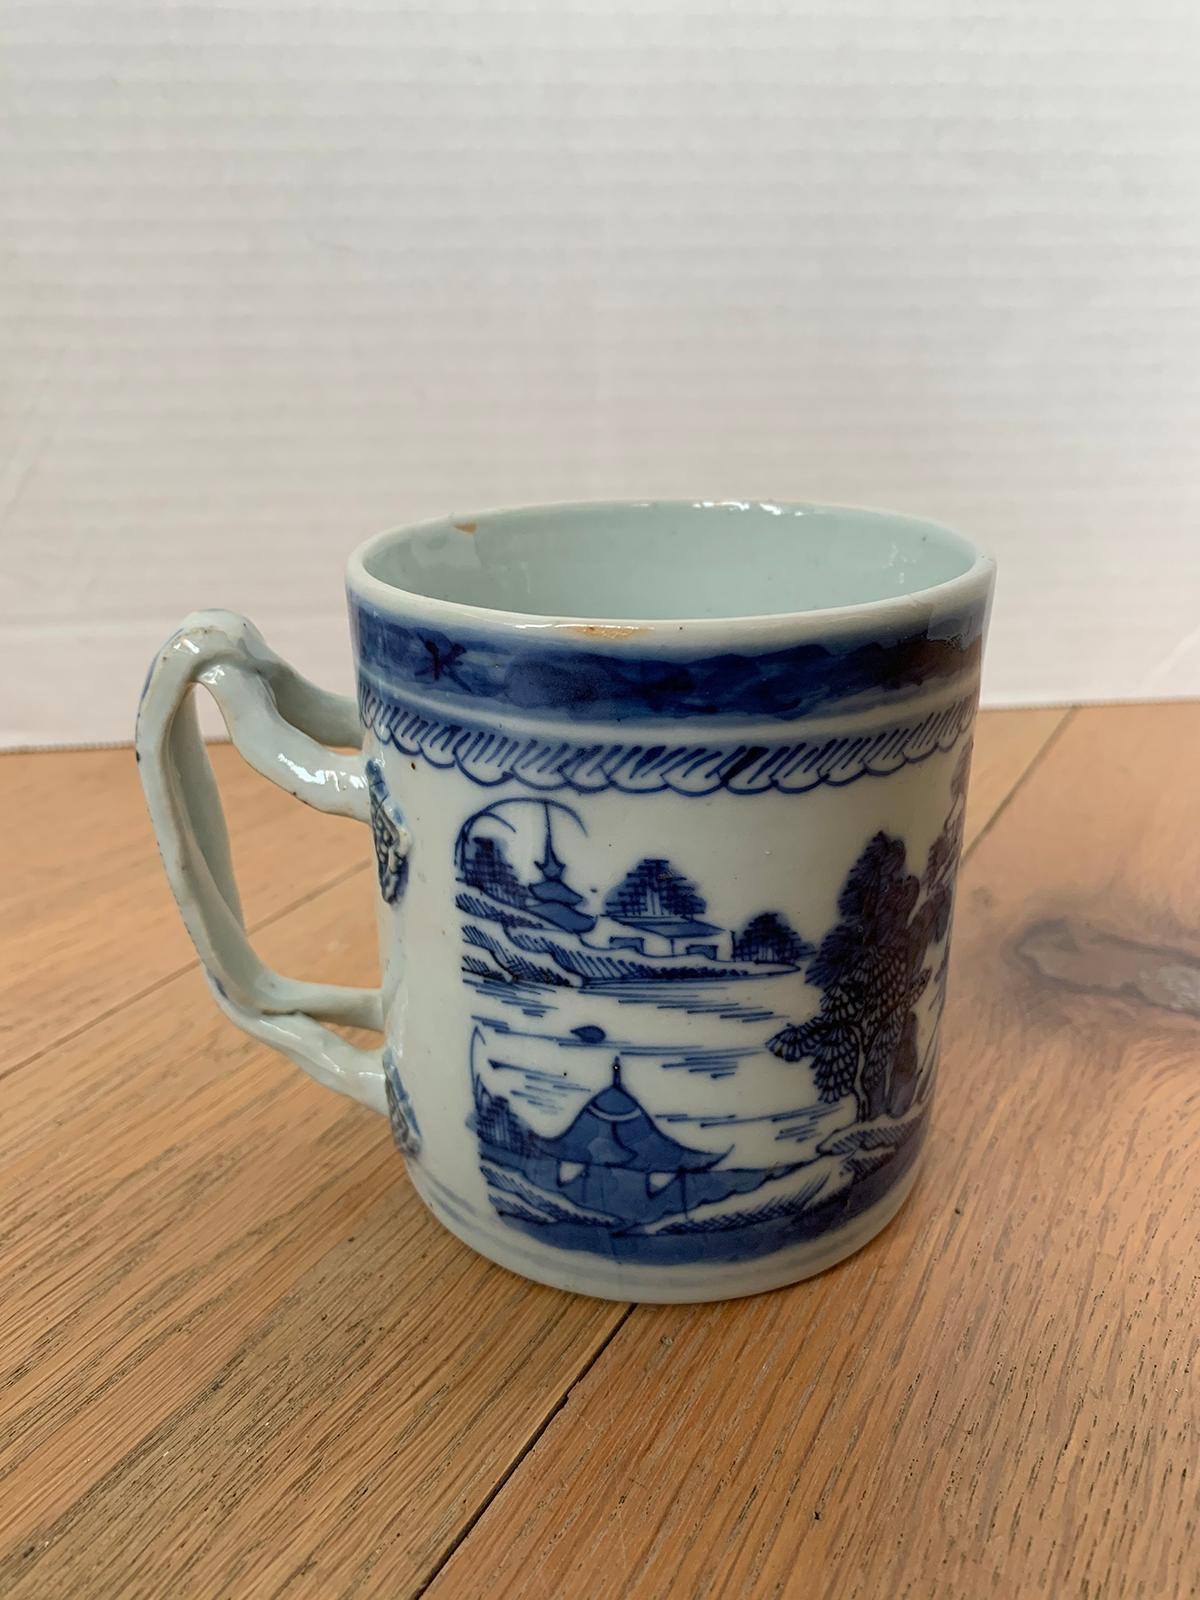 18th Century and Earlier 18th Century Chinese Export Canton Ware Blue and White Porcelain Mug, Unmarked